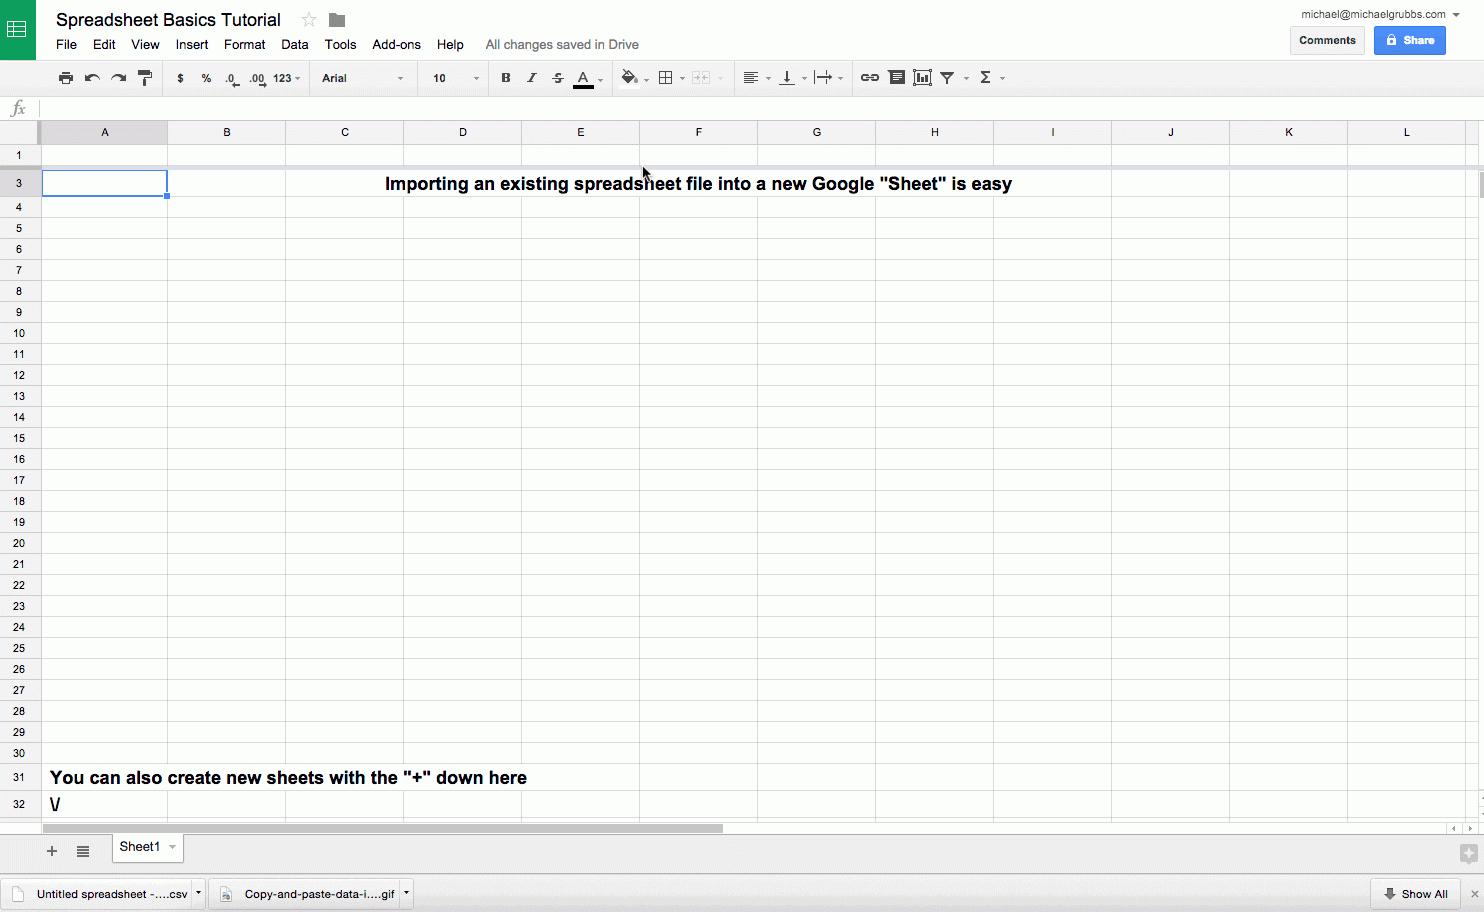 How To Create A Spreadsheet Using Excel In Google Sheets 101: The Beginner's Guide To Online Spreadsheets  The